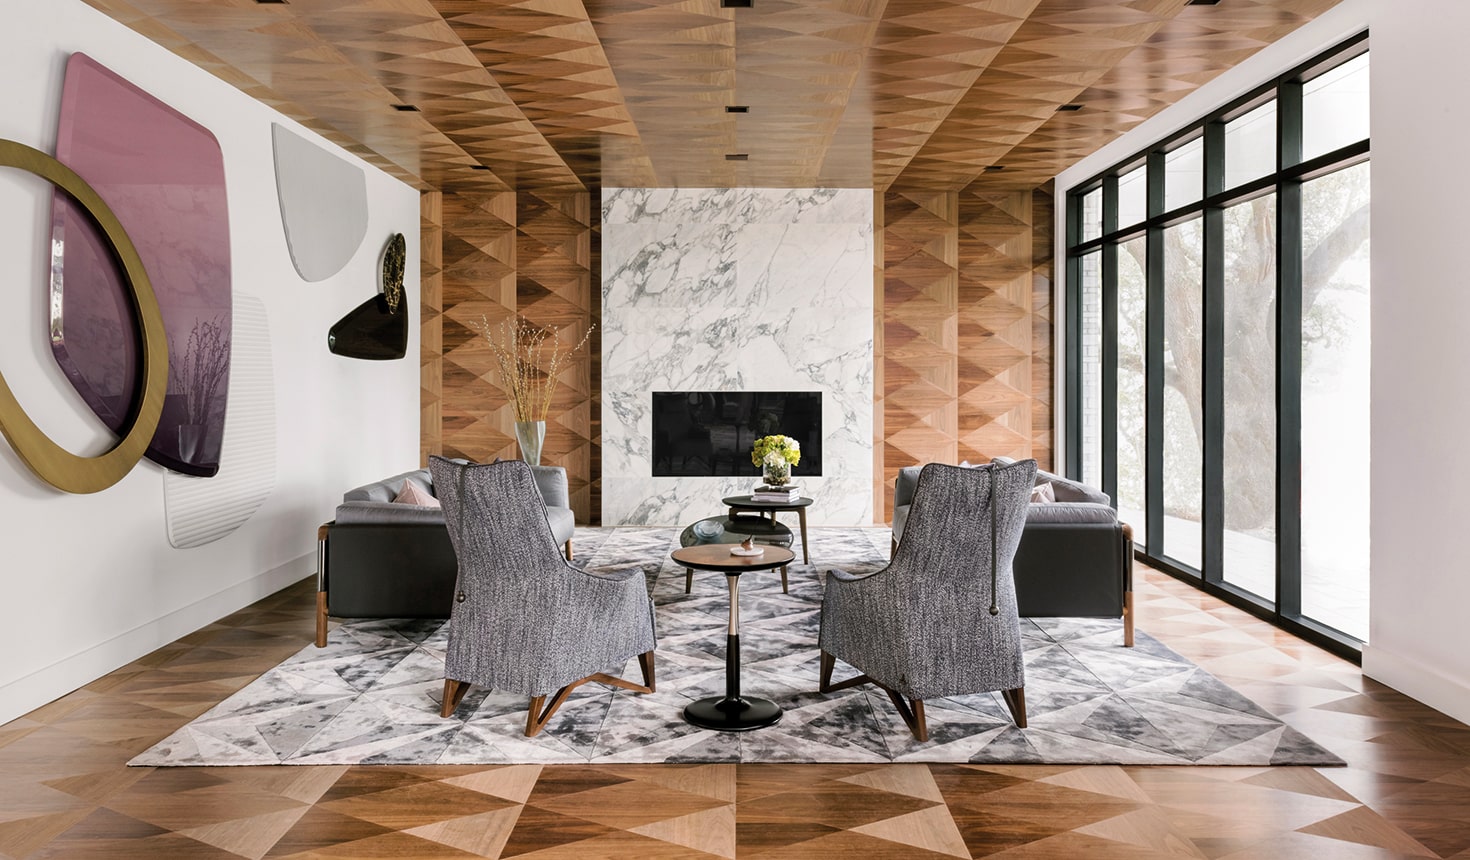 GIORGETTI HOUSTON AWARDED AT RUBY AWARDS 2021 1